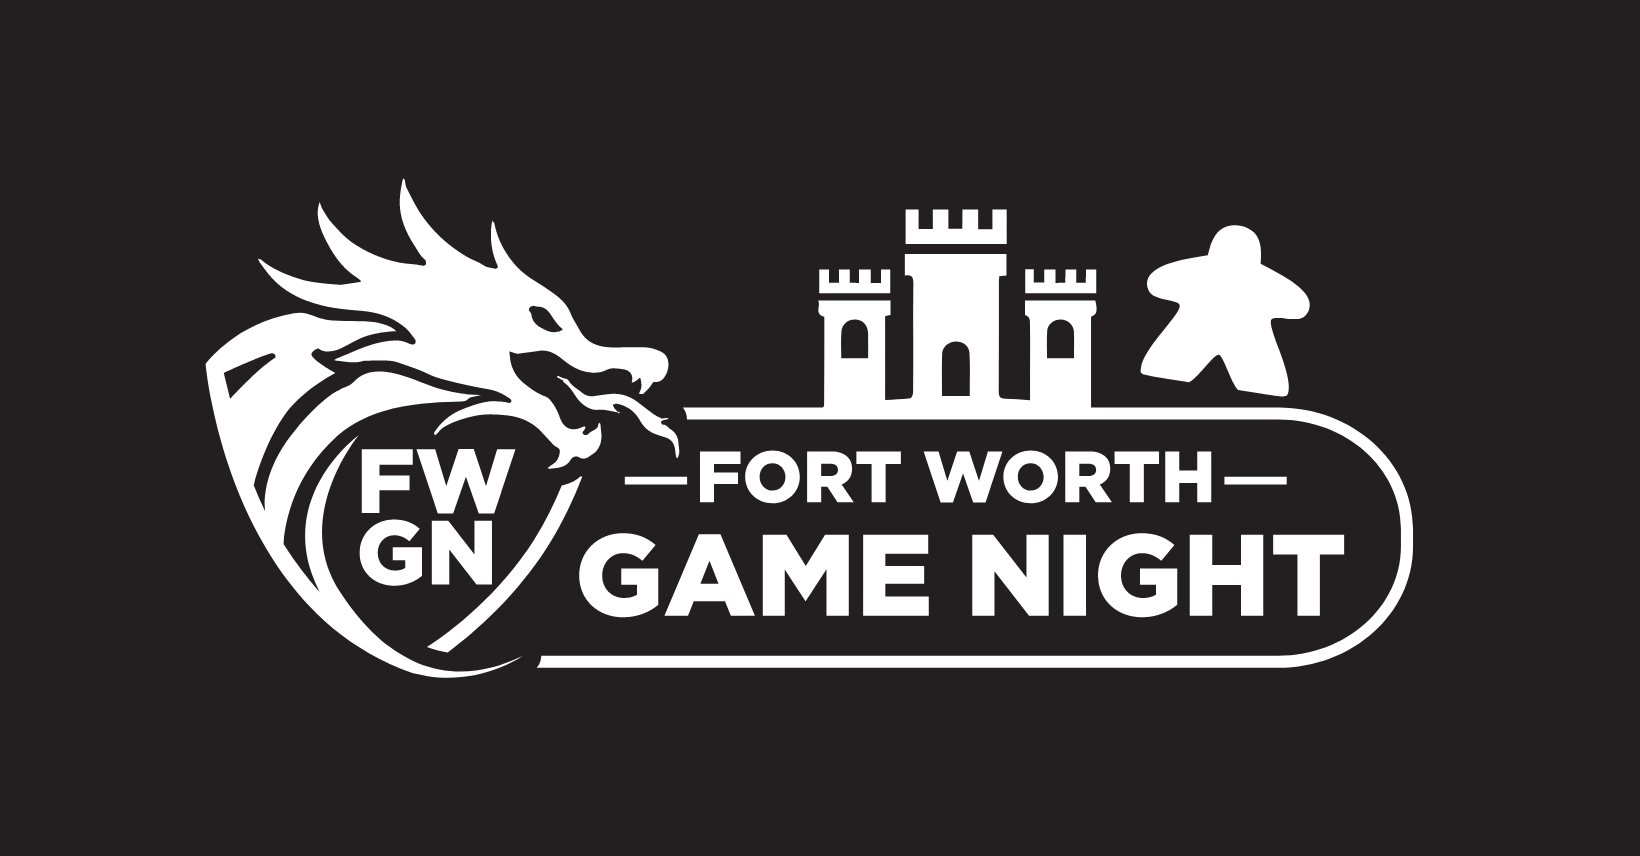 Video Games – Welcome to the City of Fort Worth